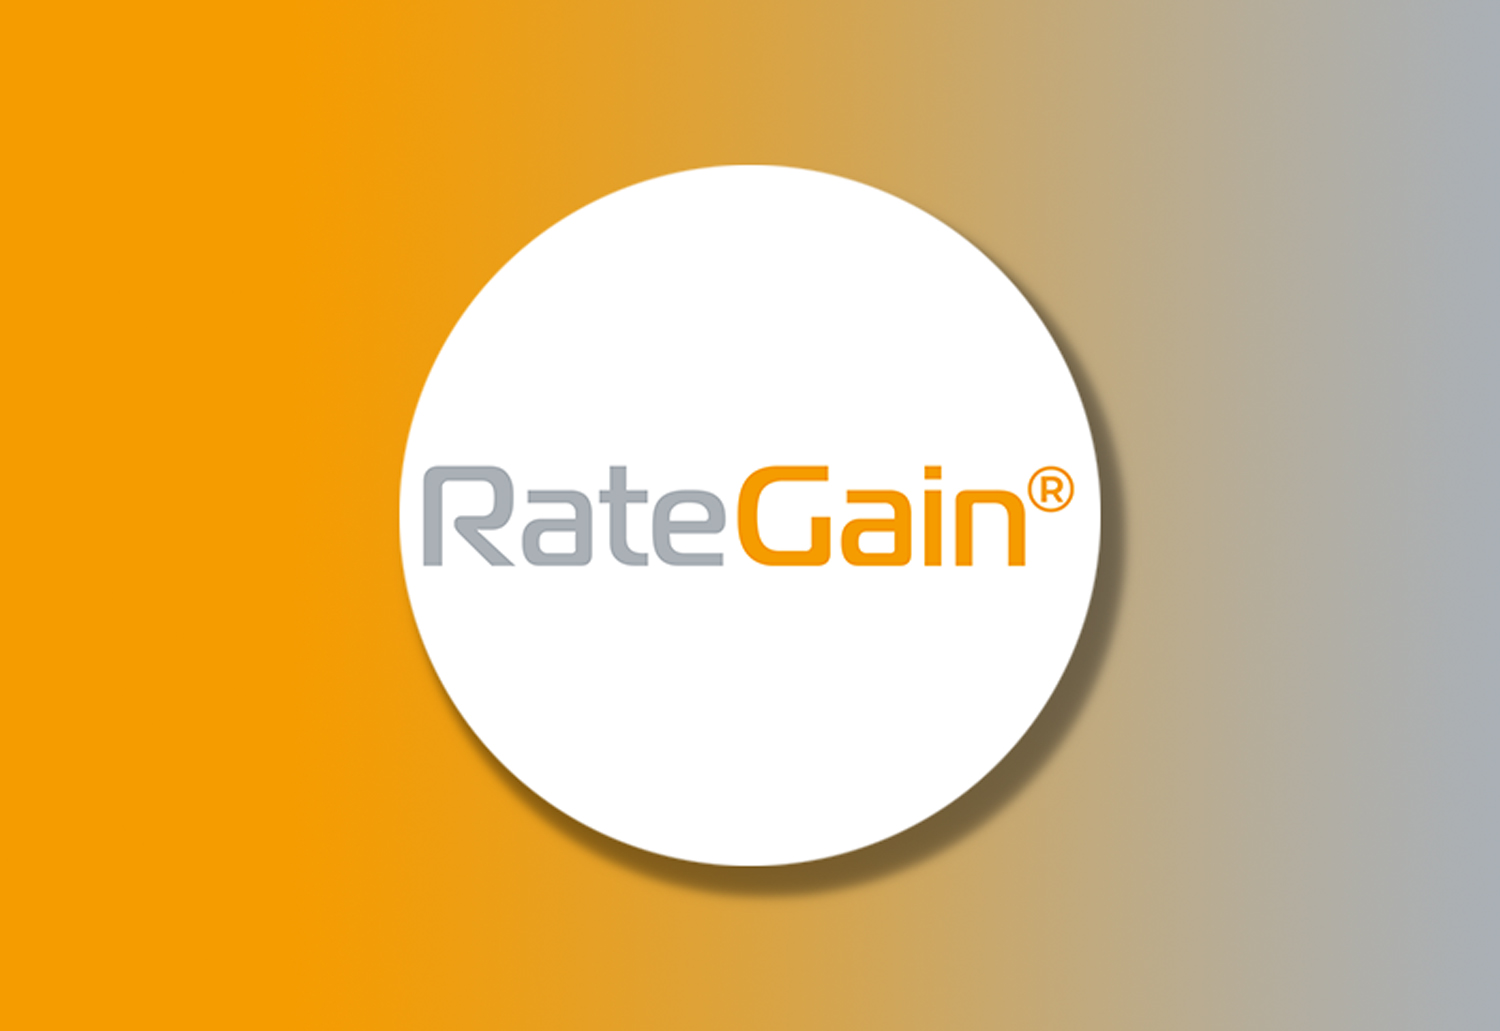 RateGain Q2FY23 Reports Consistent Growth of 47% Y-o-Y and Improved Profitability with Margin Expansion of 170% Y-o-Y